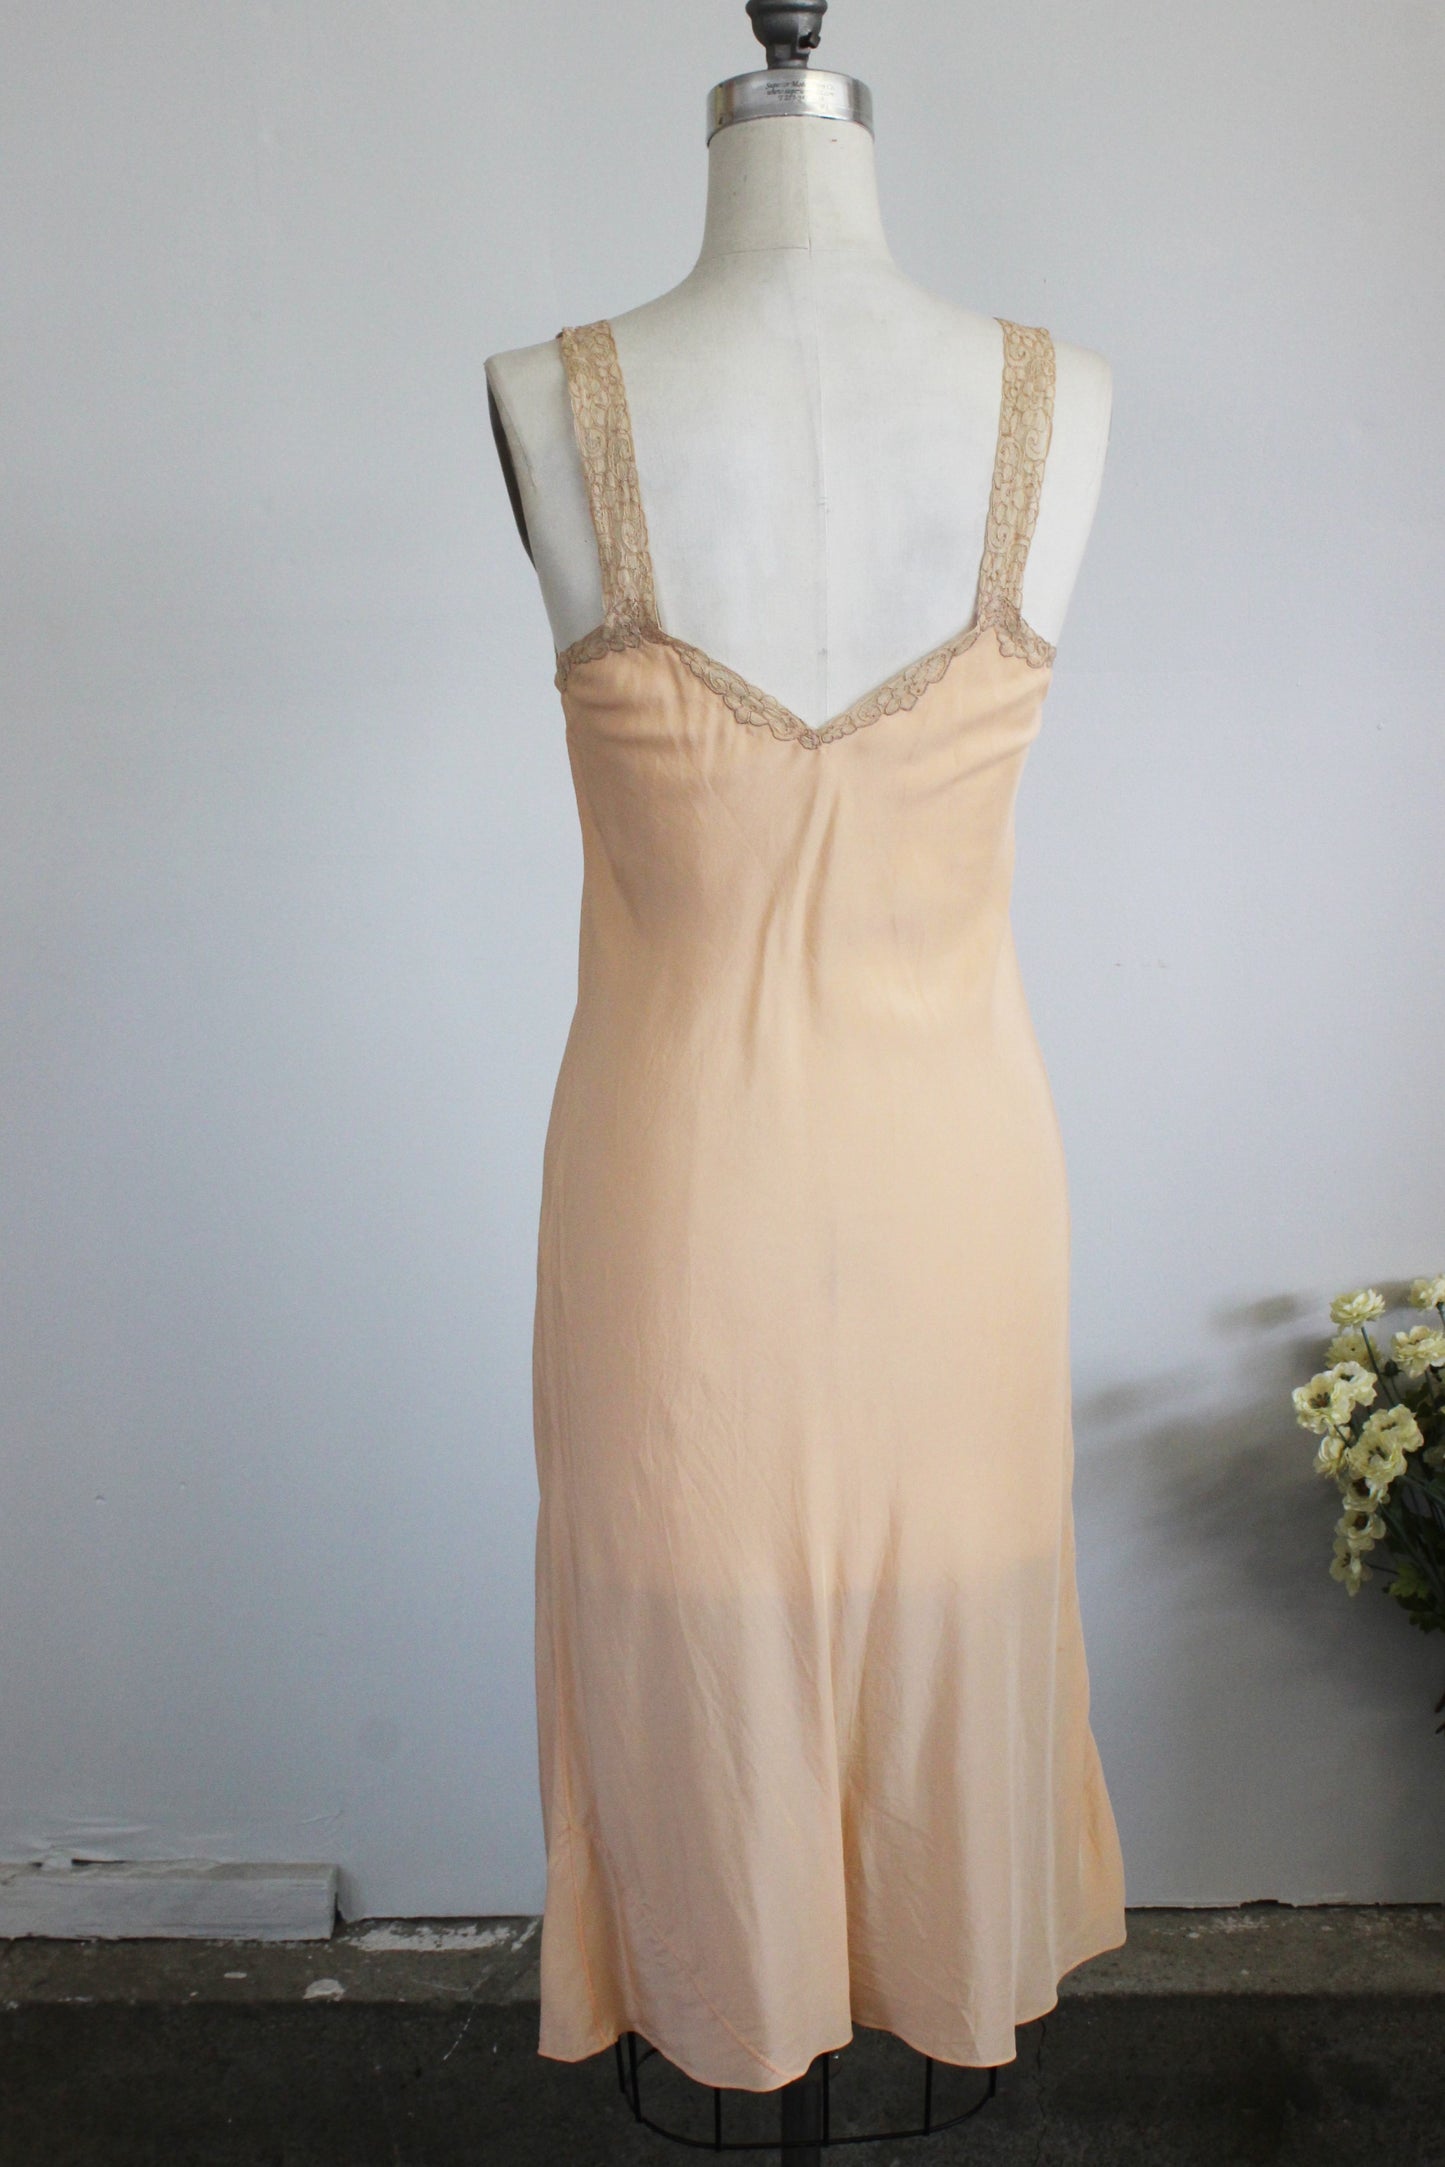 Vintage 1930s 1940s Blush Nightgown Or Slip